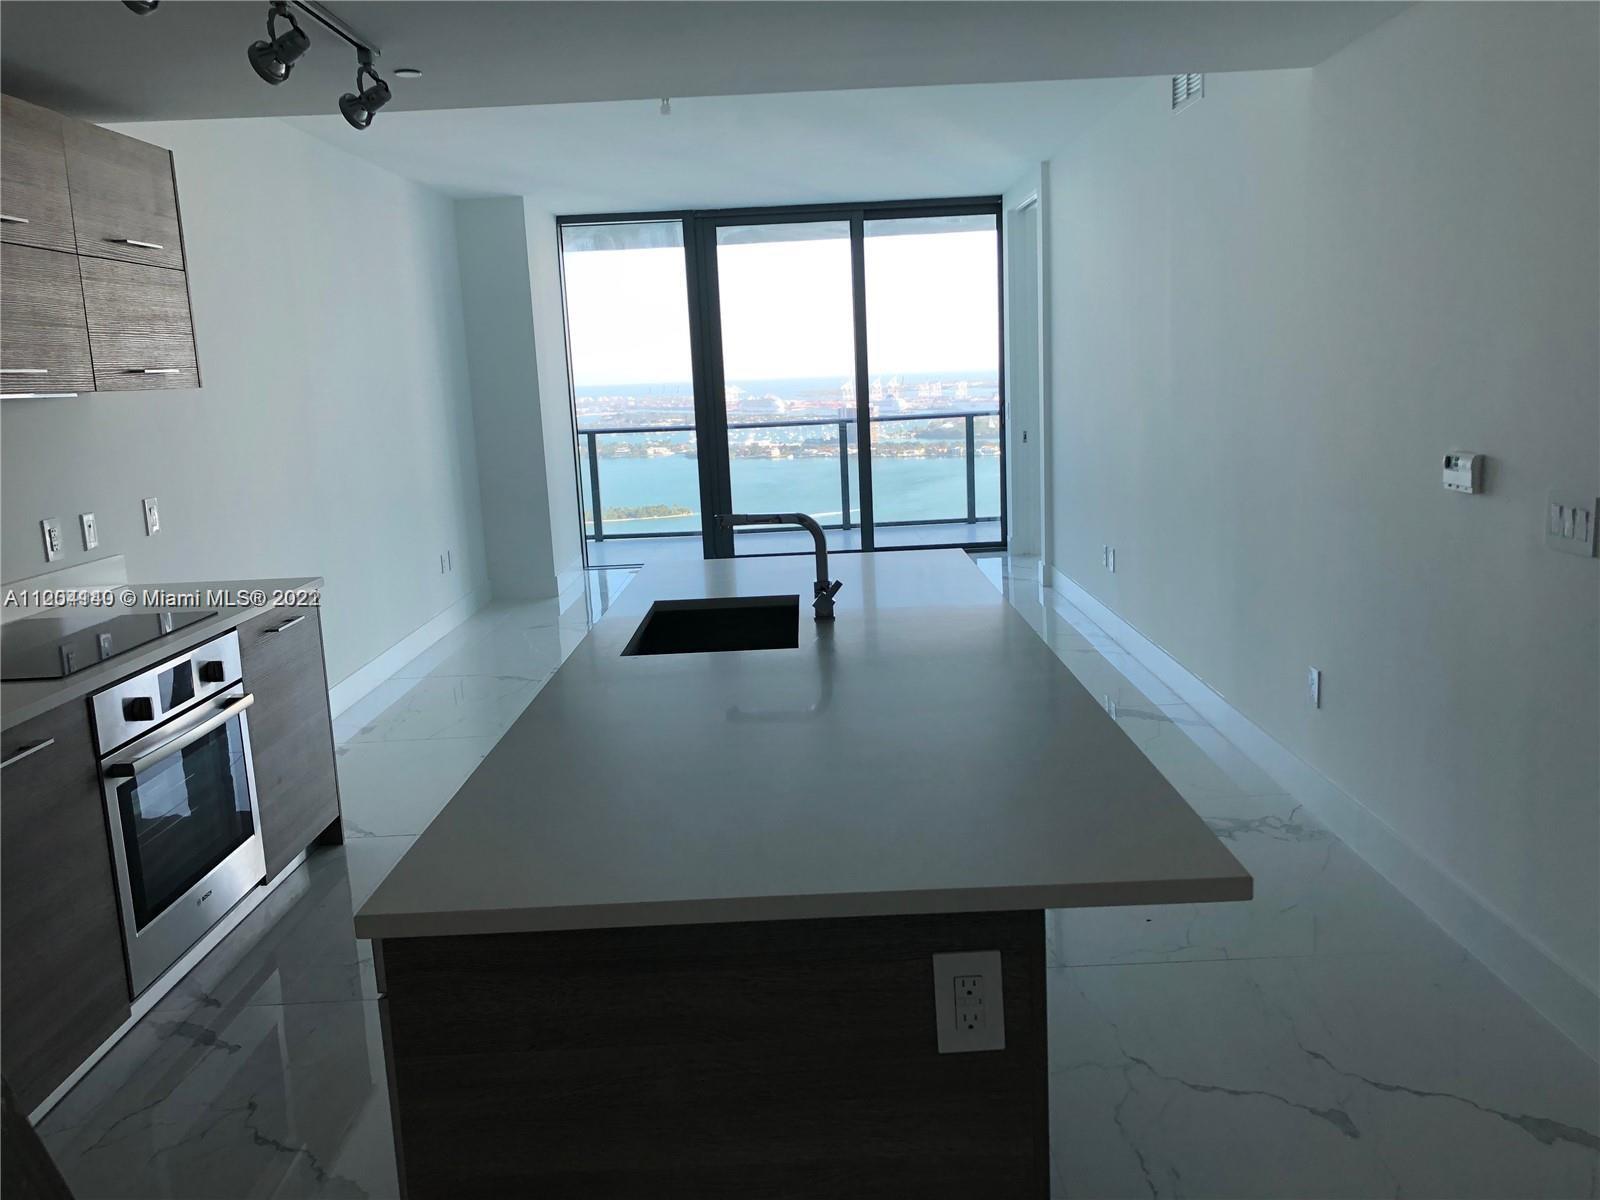 Beautiful 2bed/3bath unit with amazing breathtaking views of the bay & skyline. Private elevator, 9-